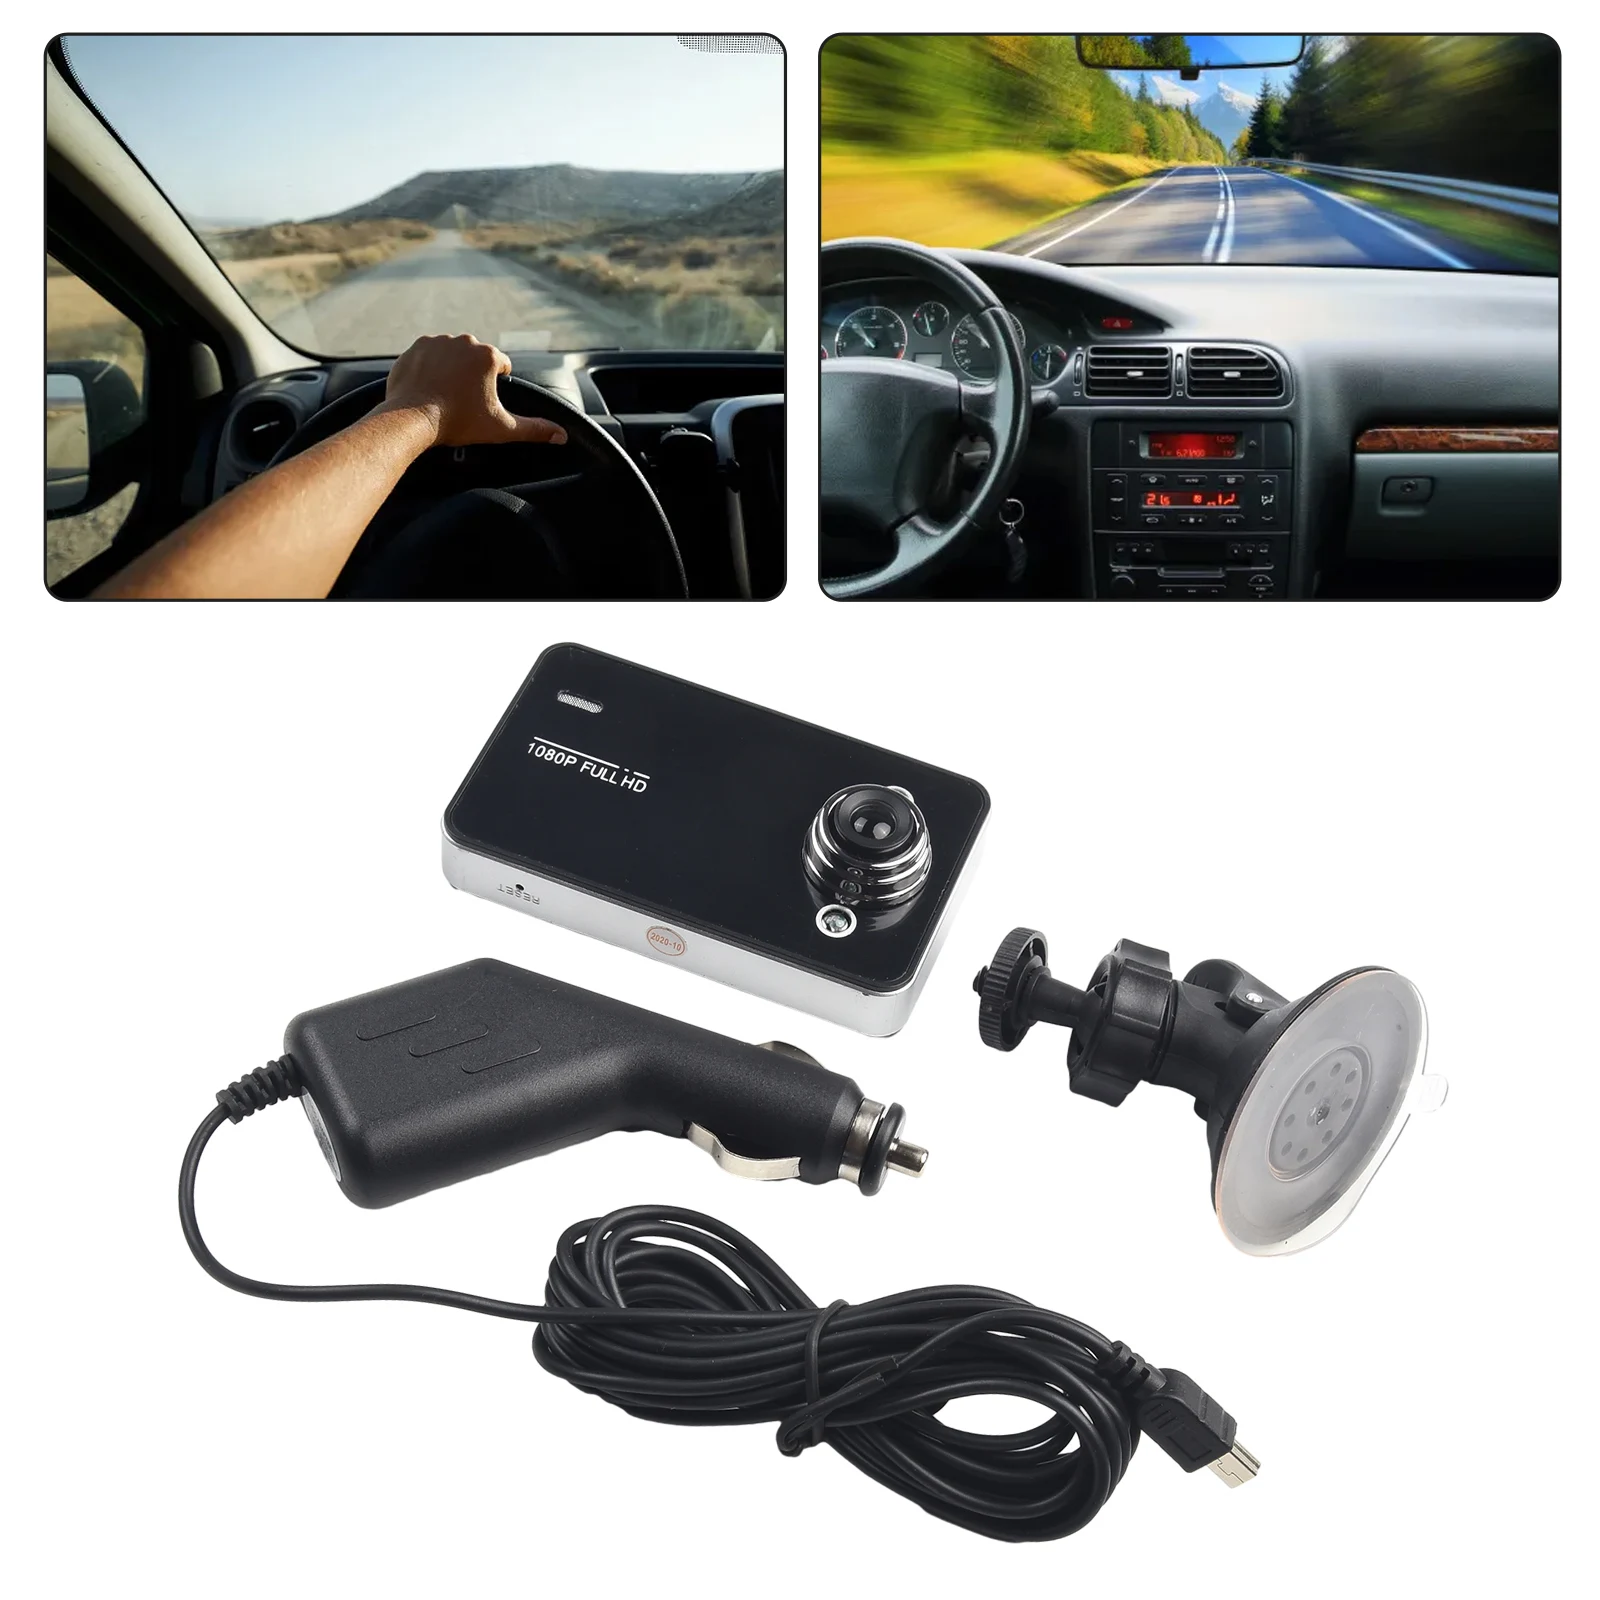 

1pc Car DVR Recorder Car Video Recorder 170-degree Charger Cable DVR Dual Lens NTSC/PAL Video Output Night Vision